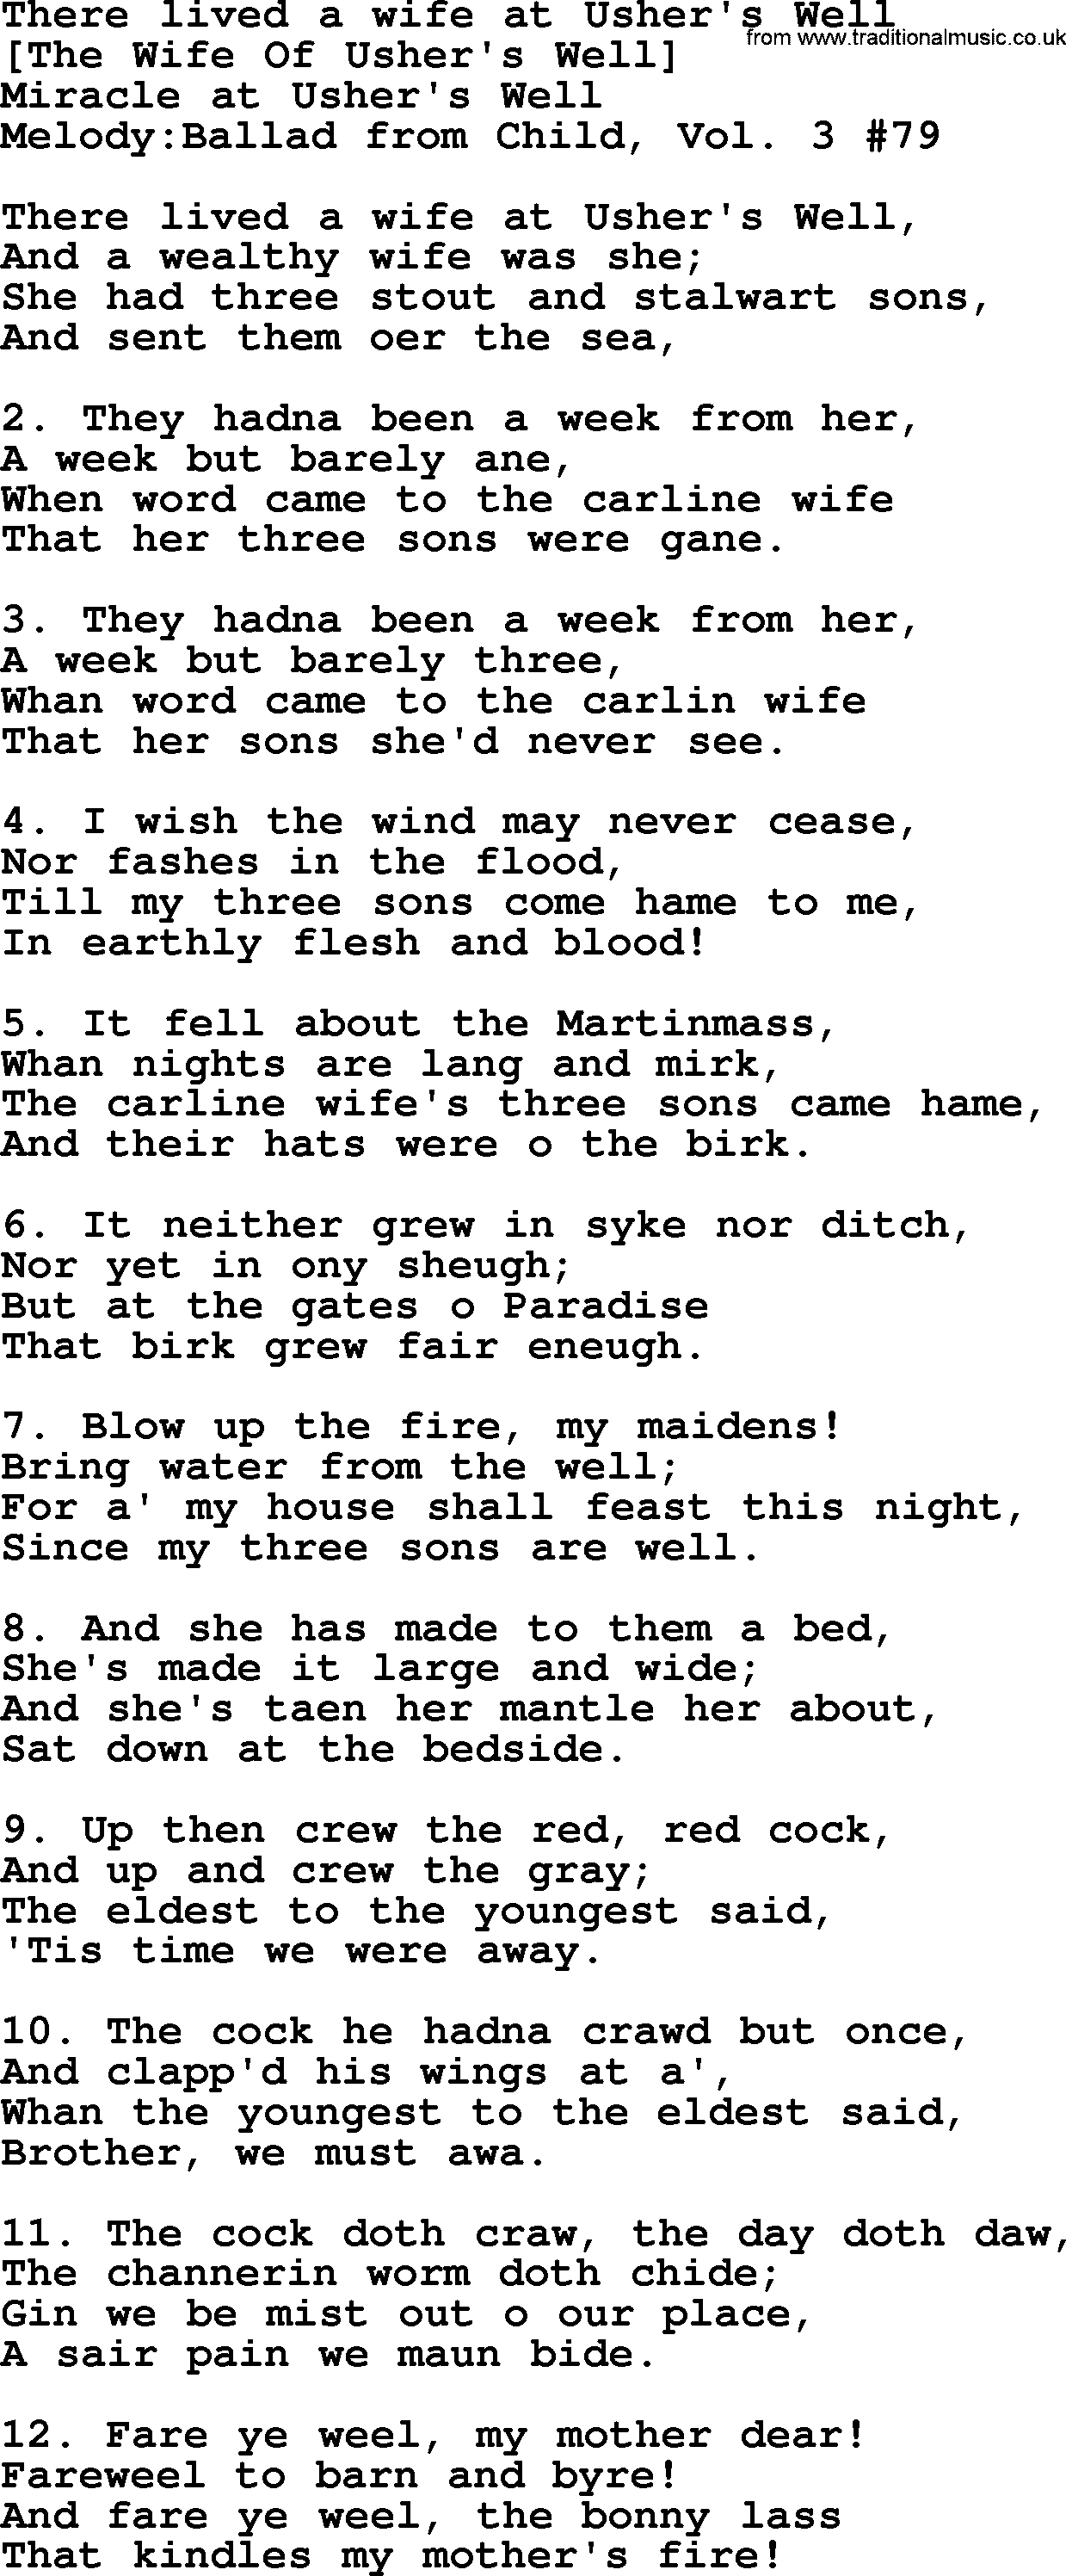 Old English Song: There Lived A Wife At Usher's Well lyrics